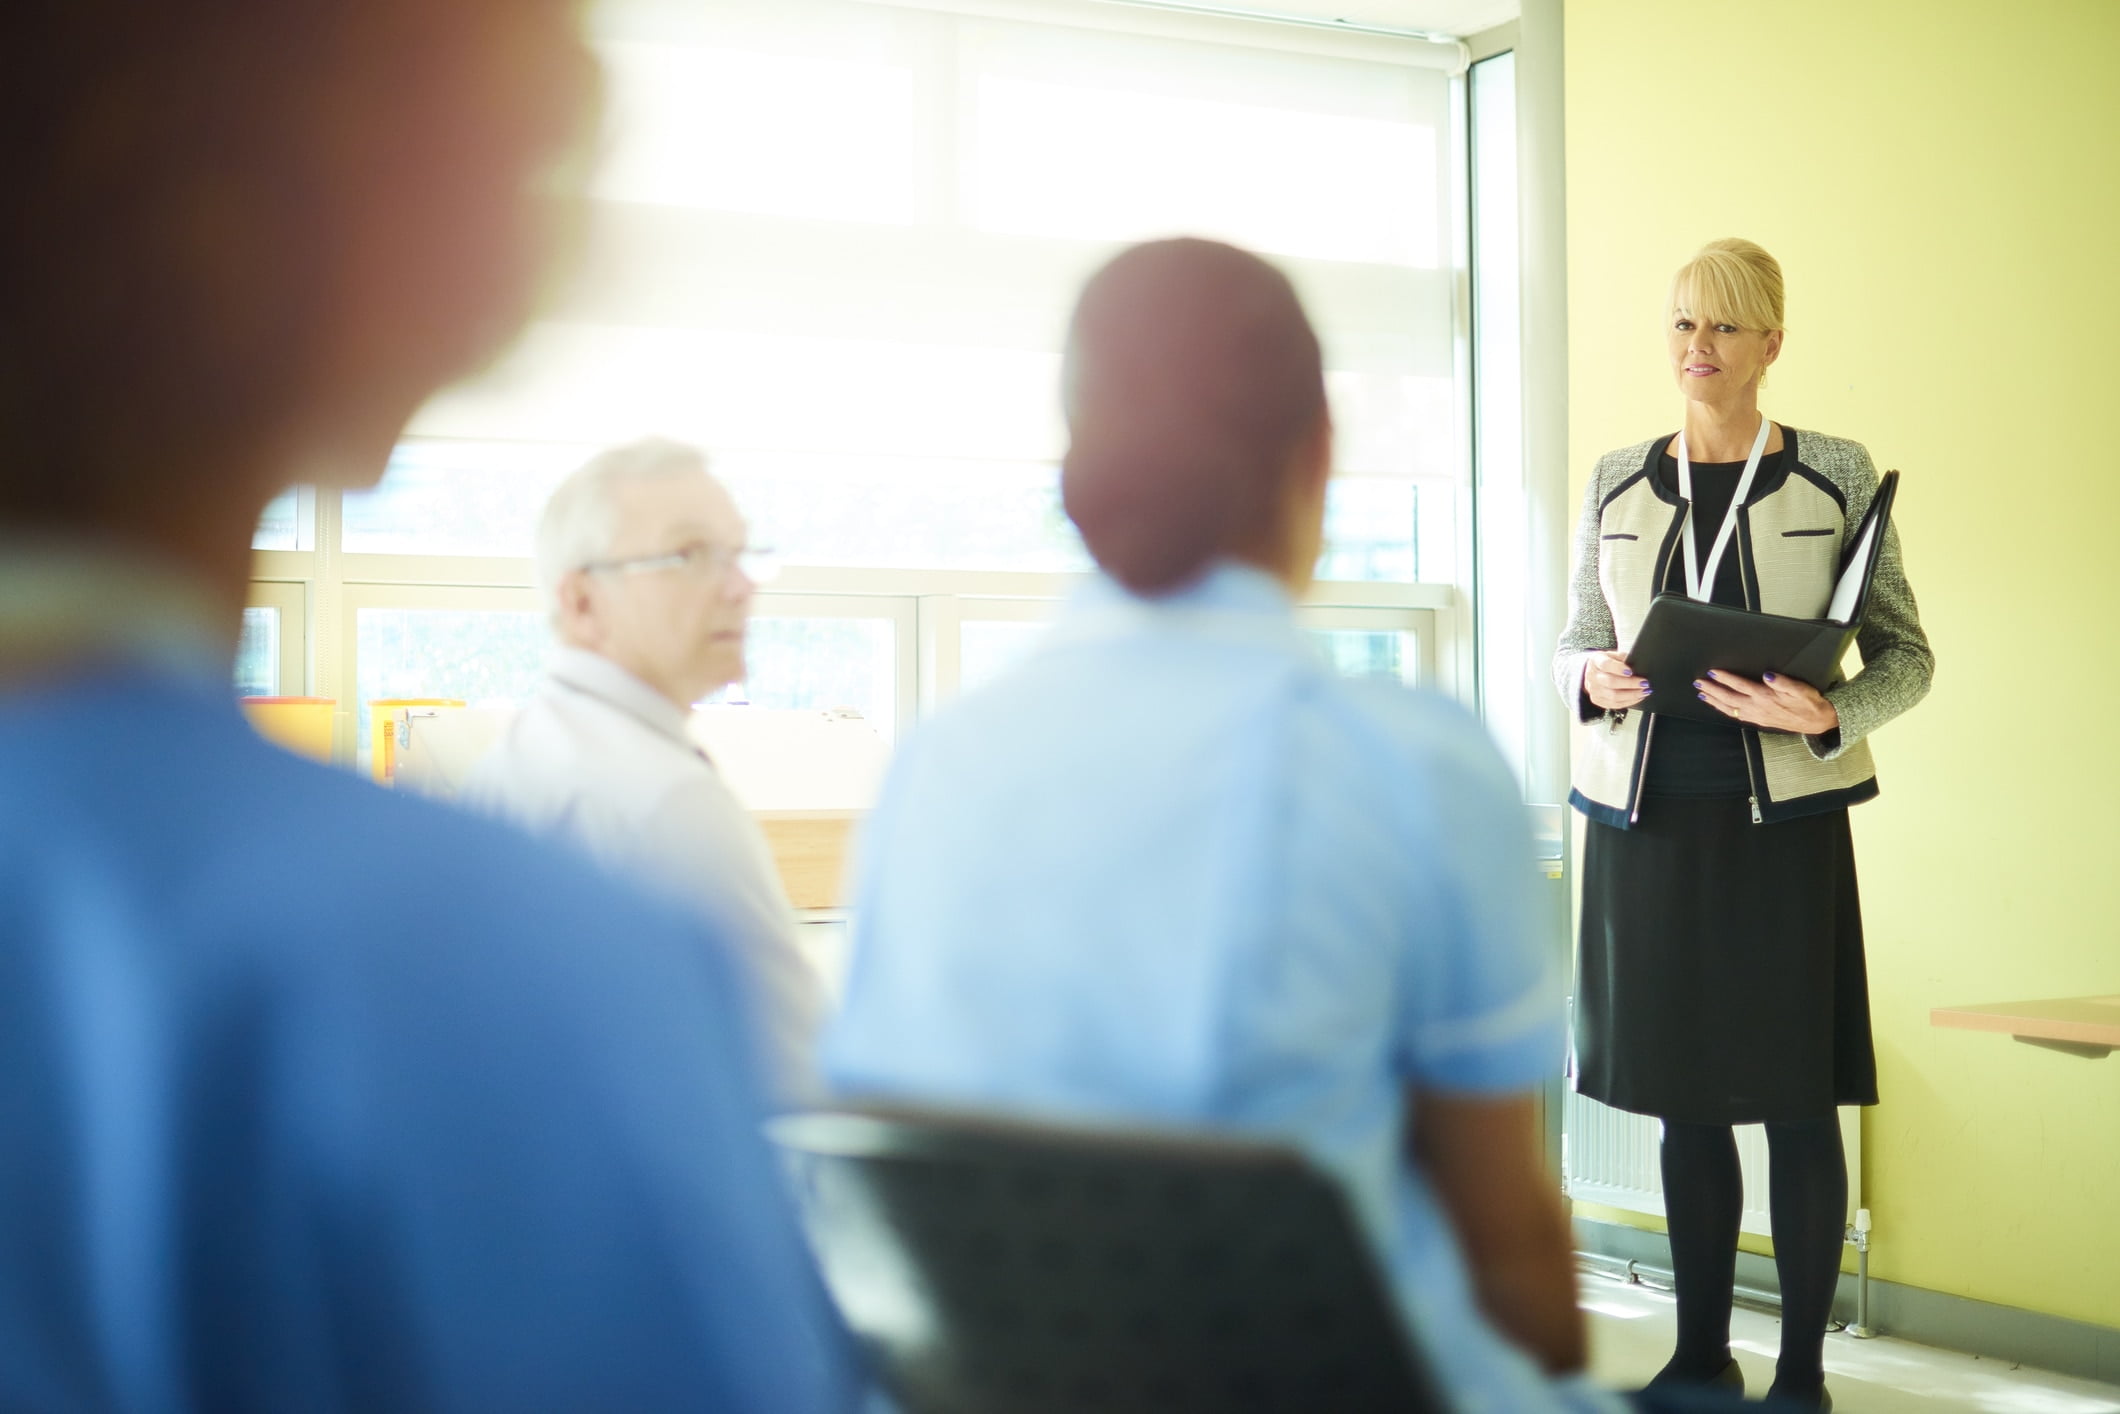 Event Planning Best Practices for Healthcare Organizations